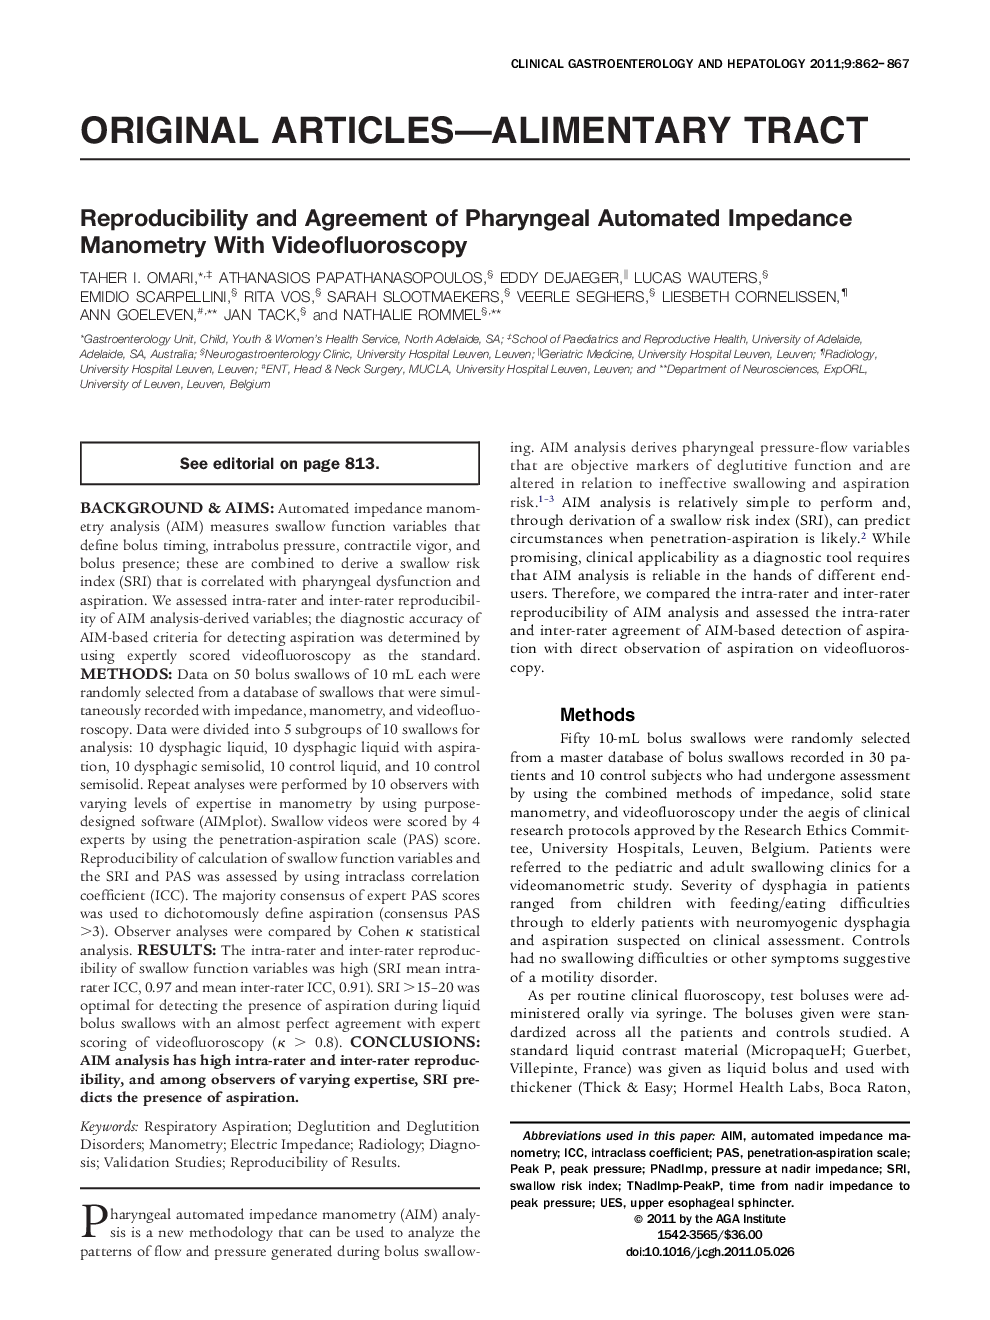 Reproducibility and Agreement of Pharyngeal Automated Impedance Manometry With Videofluoroscopy